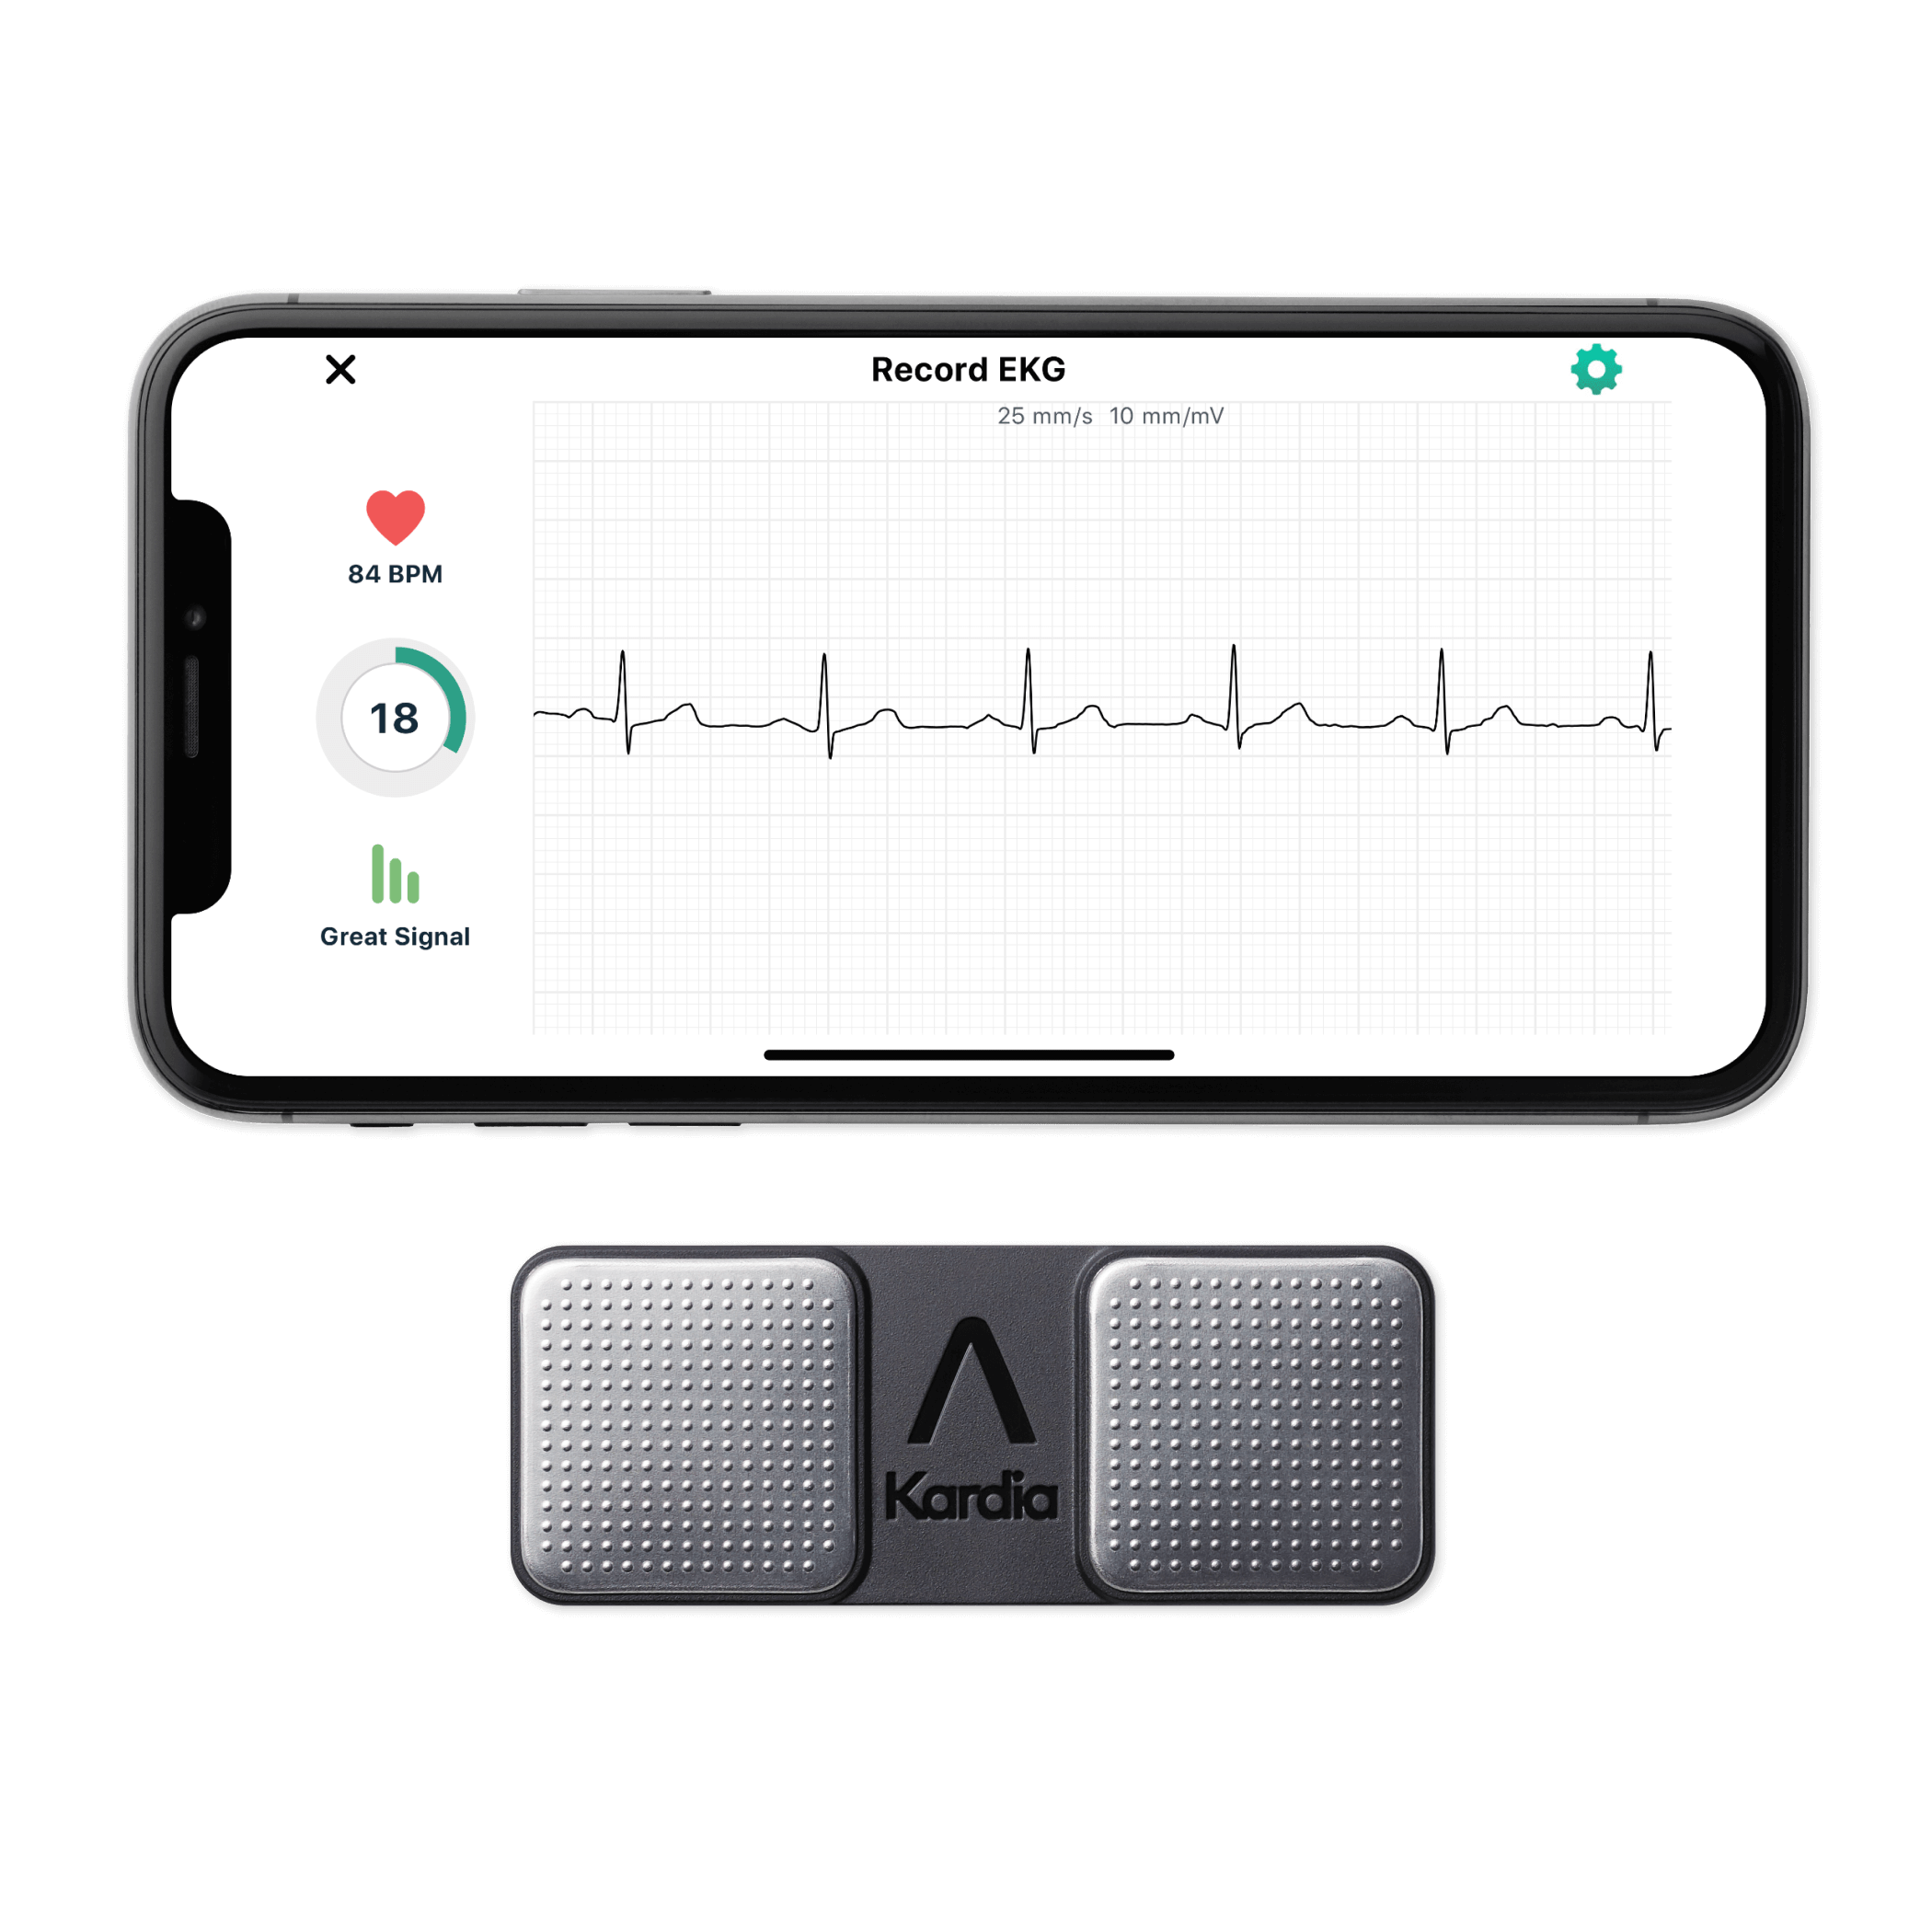 OMRON Healthcare Launches Breakthrough in Home ECG and Blood